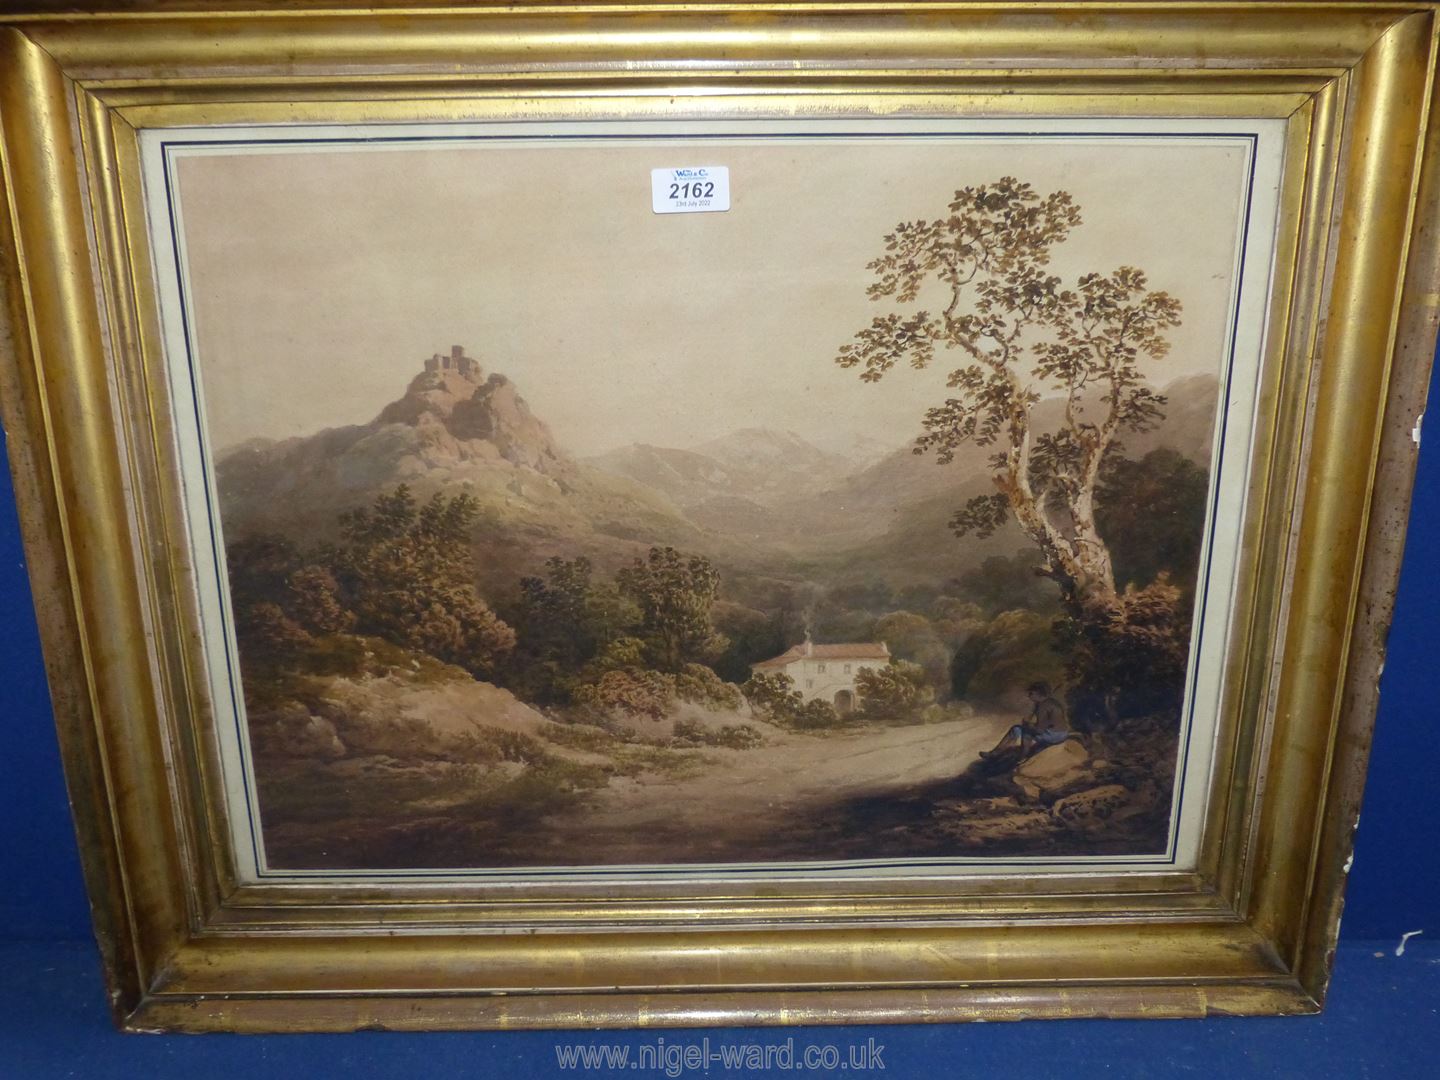 A framed Watercolour depicting Villa in a valley with mountains in the distance and a young boy sat